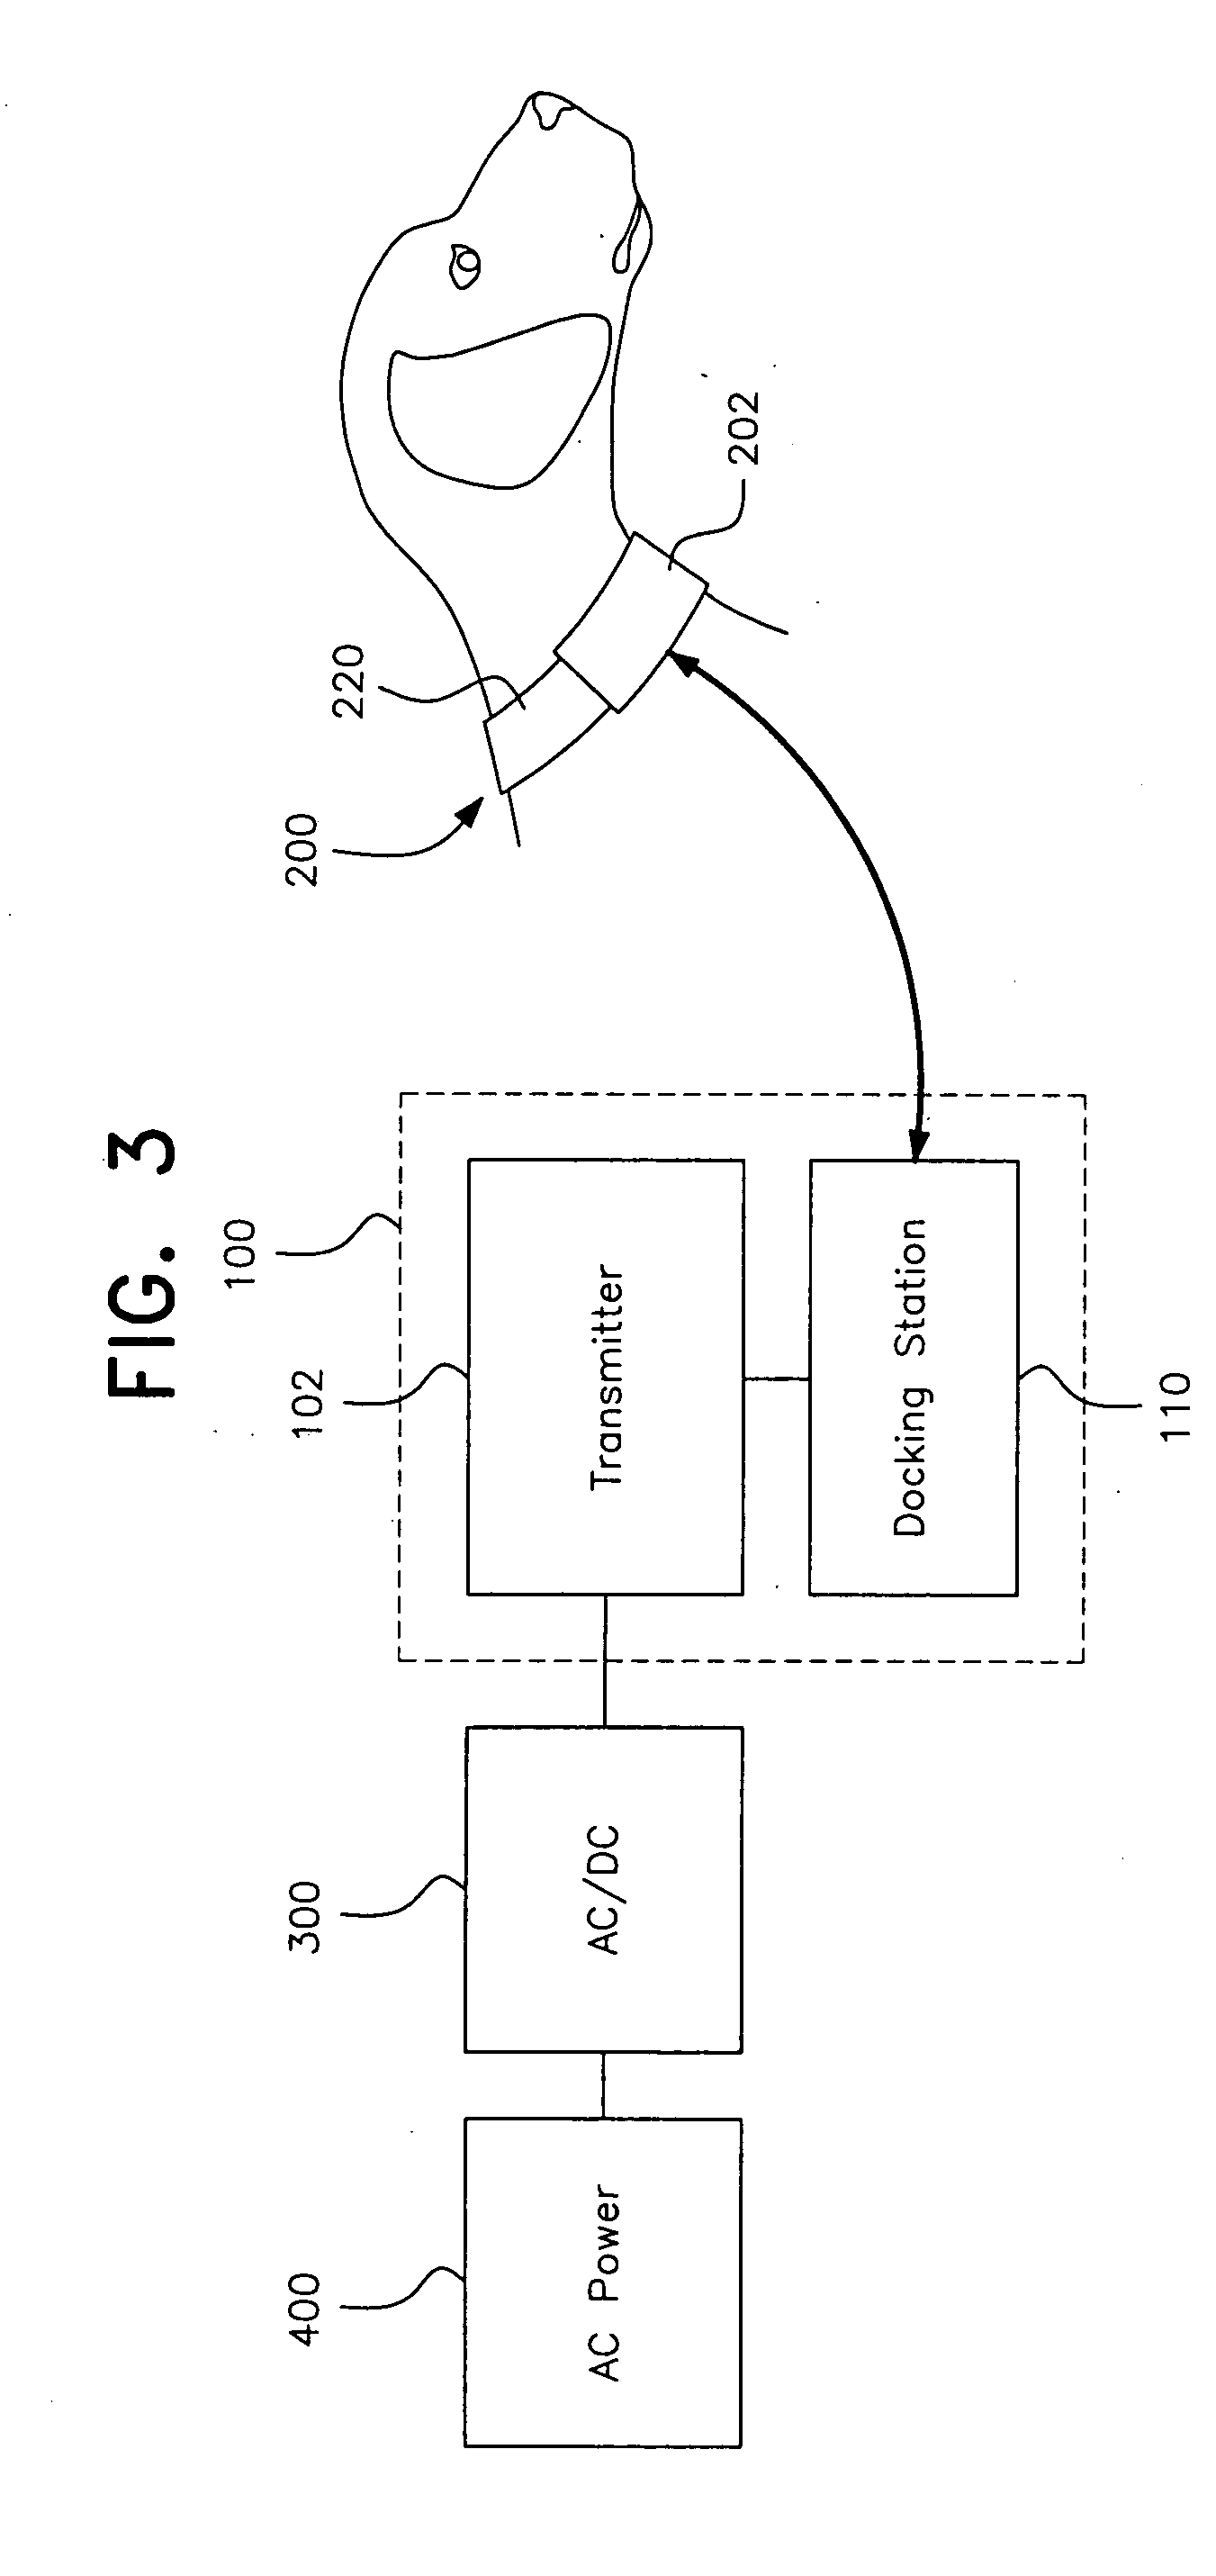 Control station with integrated collar recharging docking station for pet electronics products